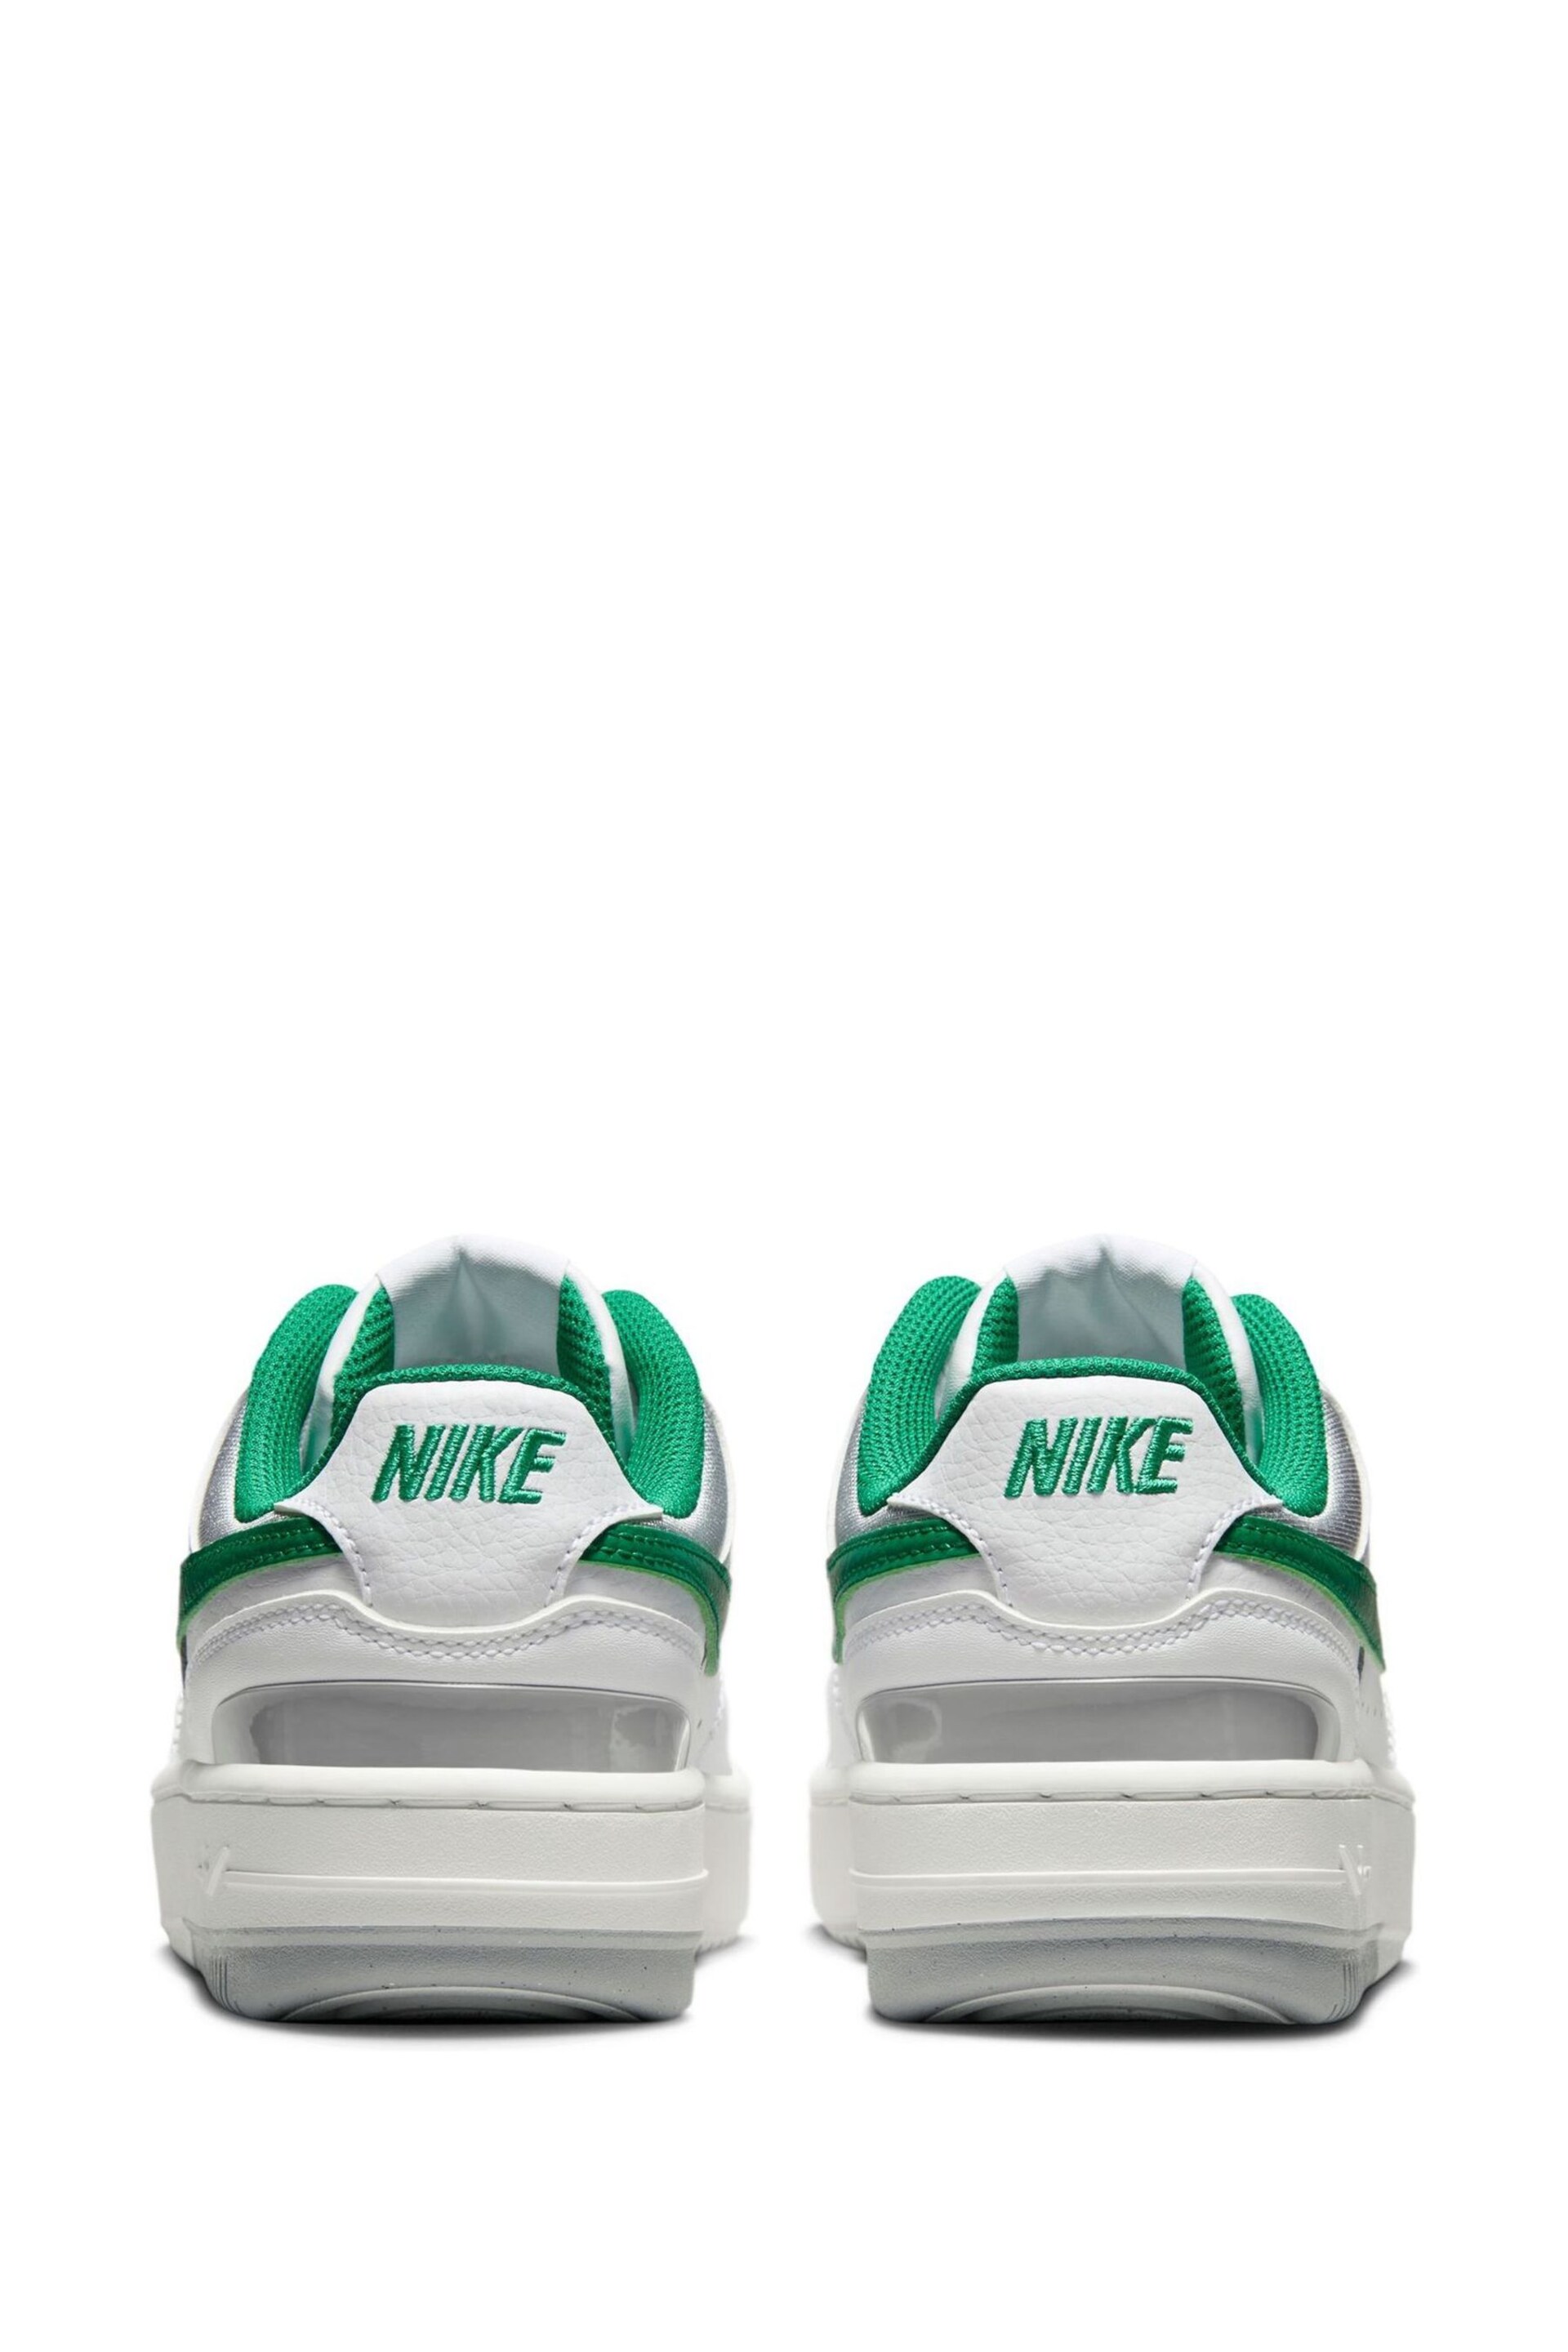 Nike White/Green Gamma Force Trainers - Image 6 of 10